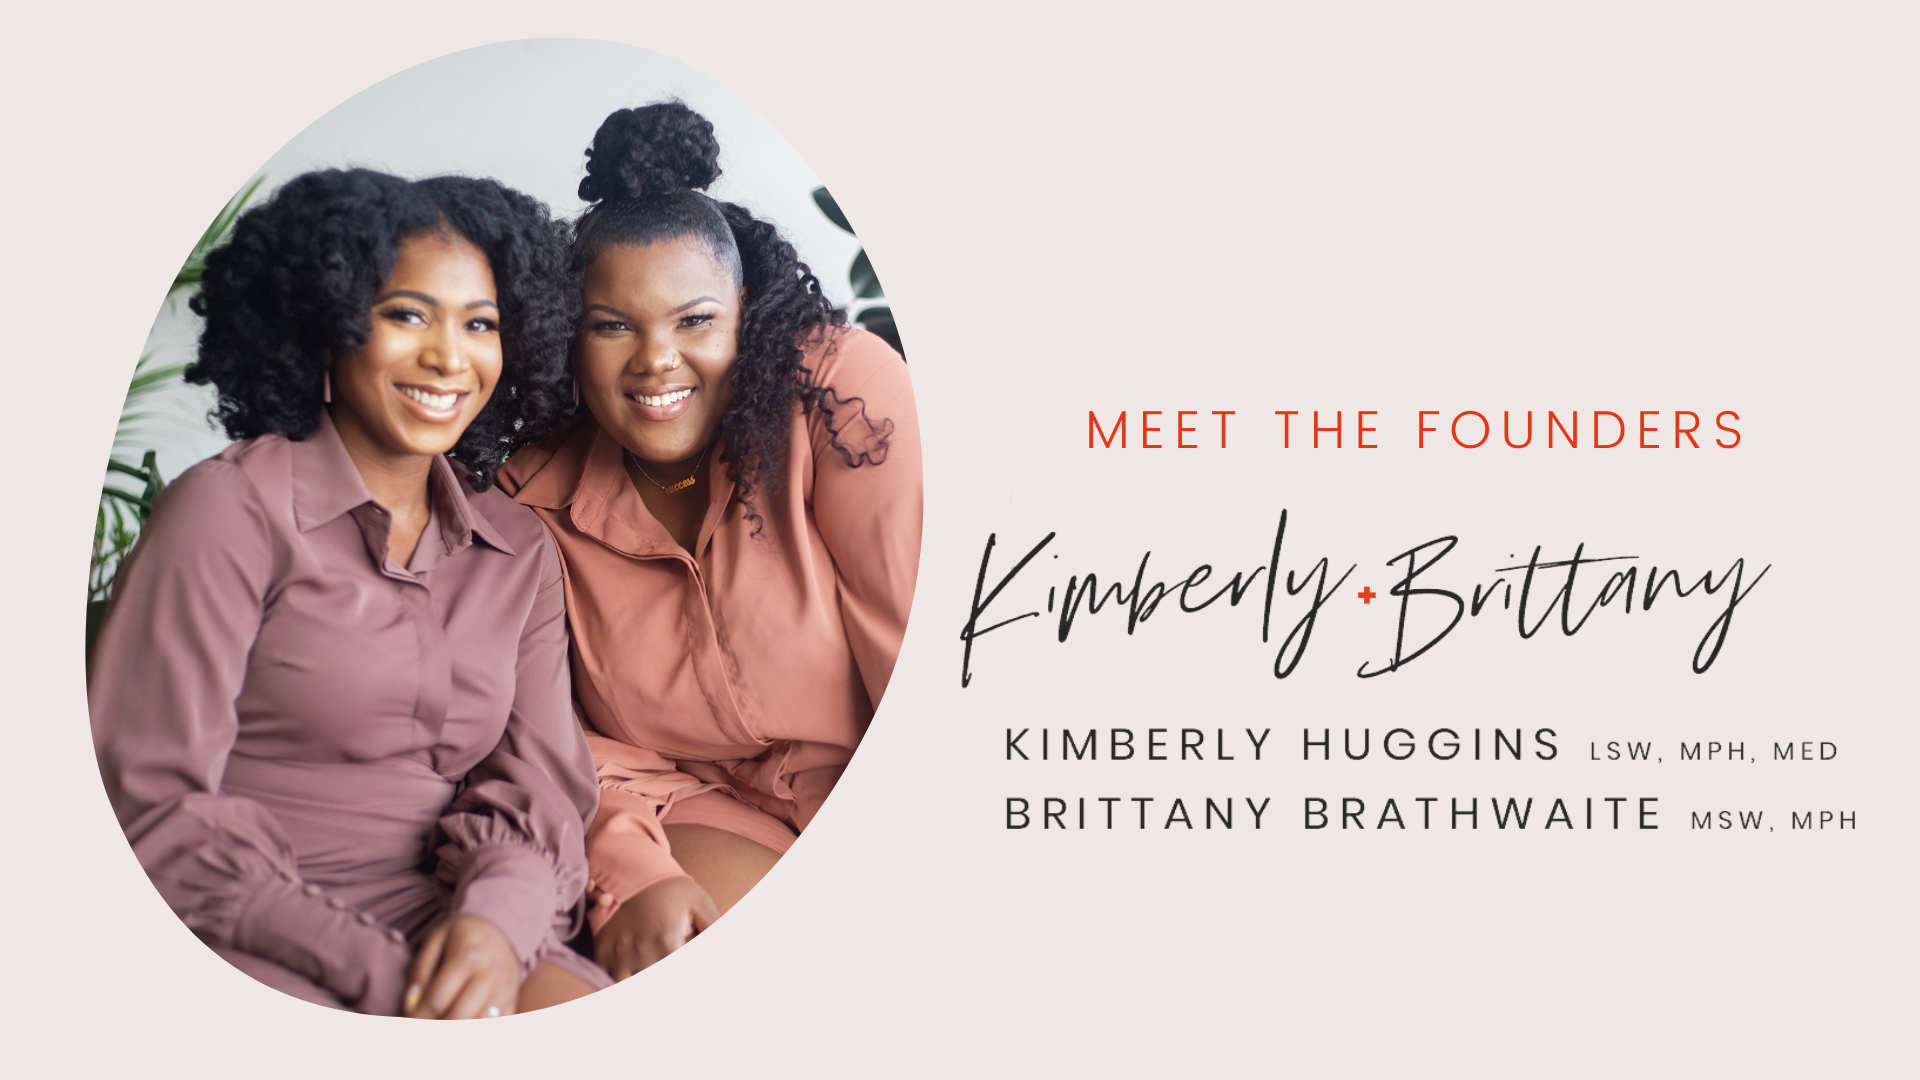 meet the founders Kimberly Huggins and Brittany Brathwaite